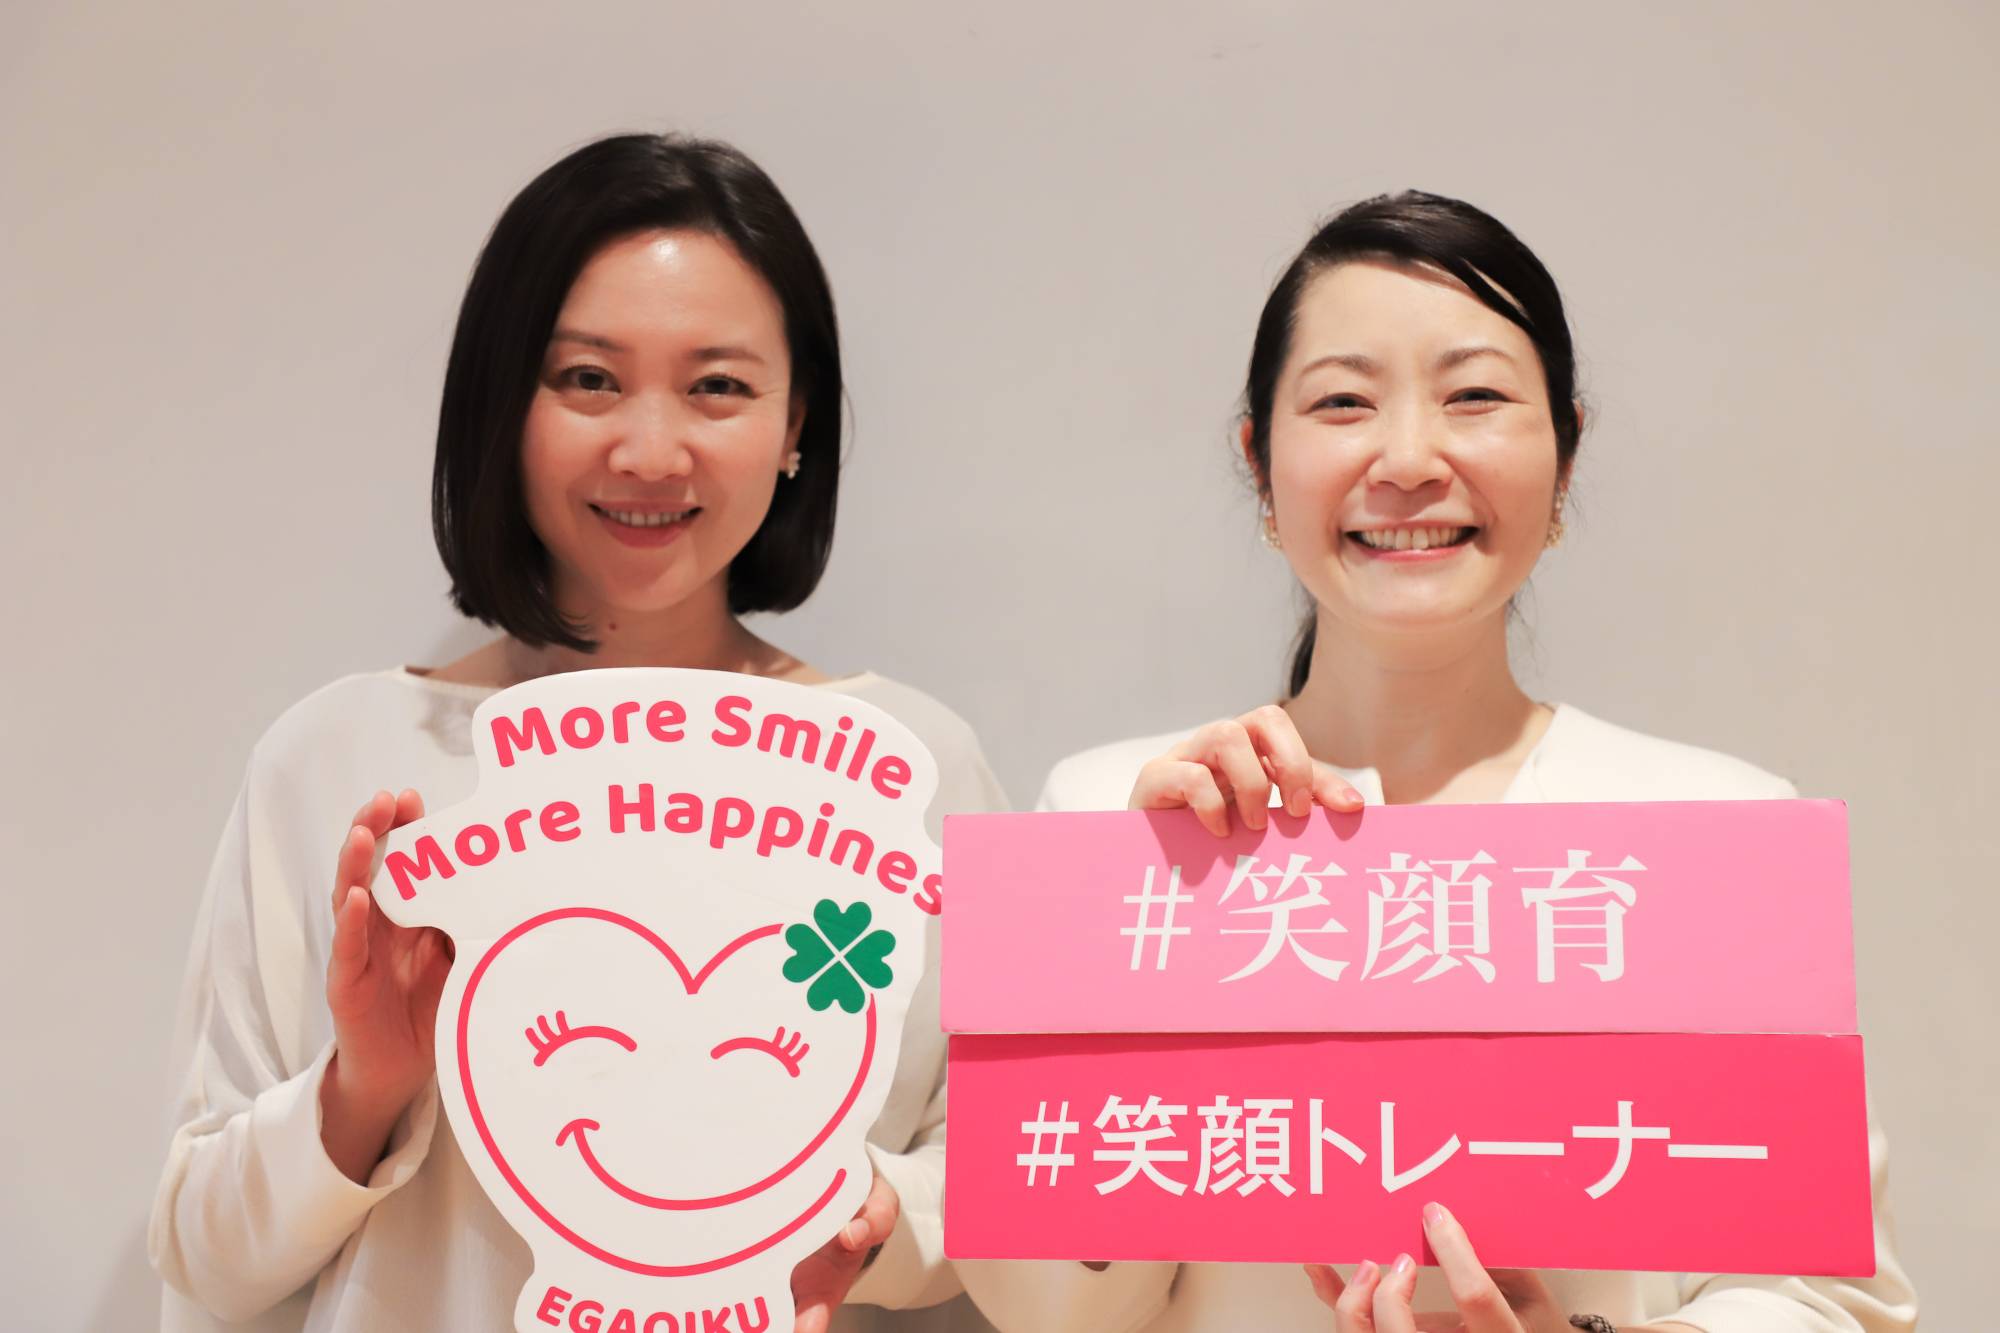 Remembering how to smile? Japan training sessions help prepare for life after masks | The Japan Times